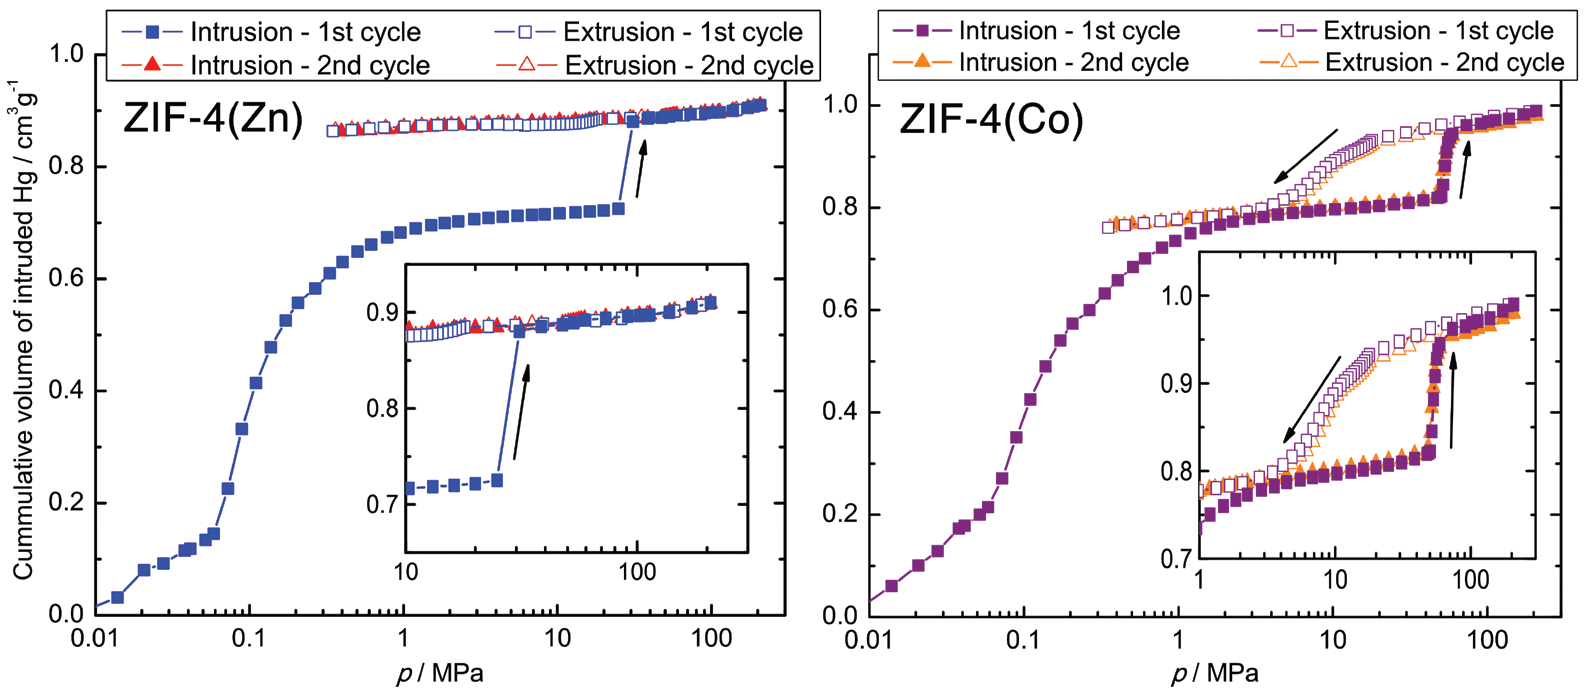 Figure 3: Mercury intrusion-extrusion curves recorded for ZIF-4(M) materials at room temperature. The insets reveal a closer look on the data in the region of the op-cp transition, which is irreversible<br/>for ZIF-4(Zn), and reversible for ZIF-4(Co).